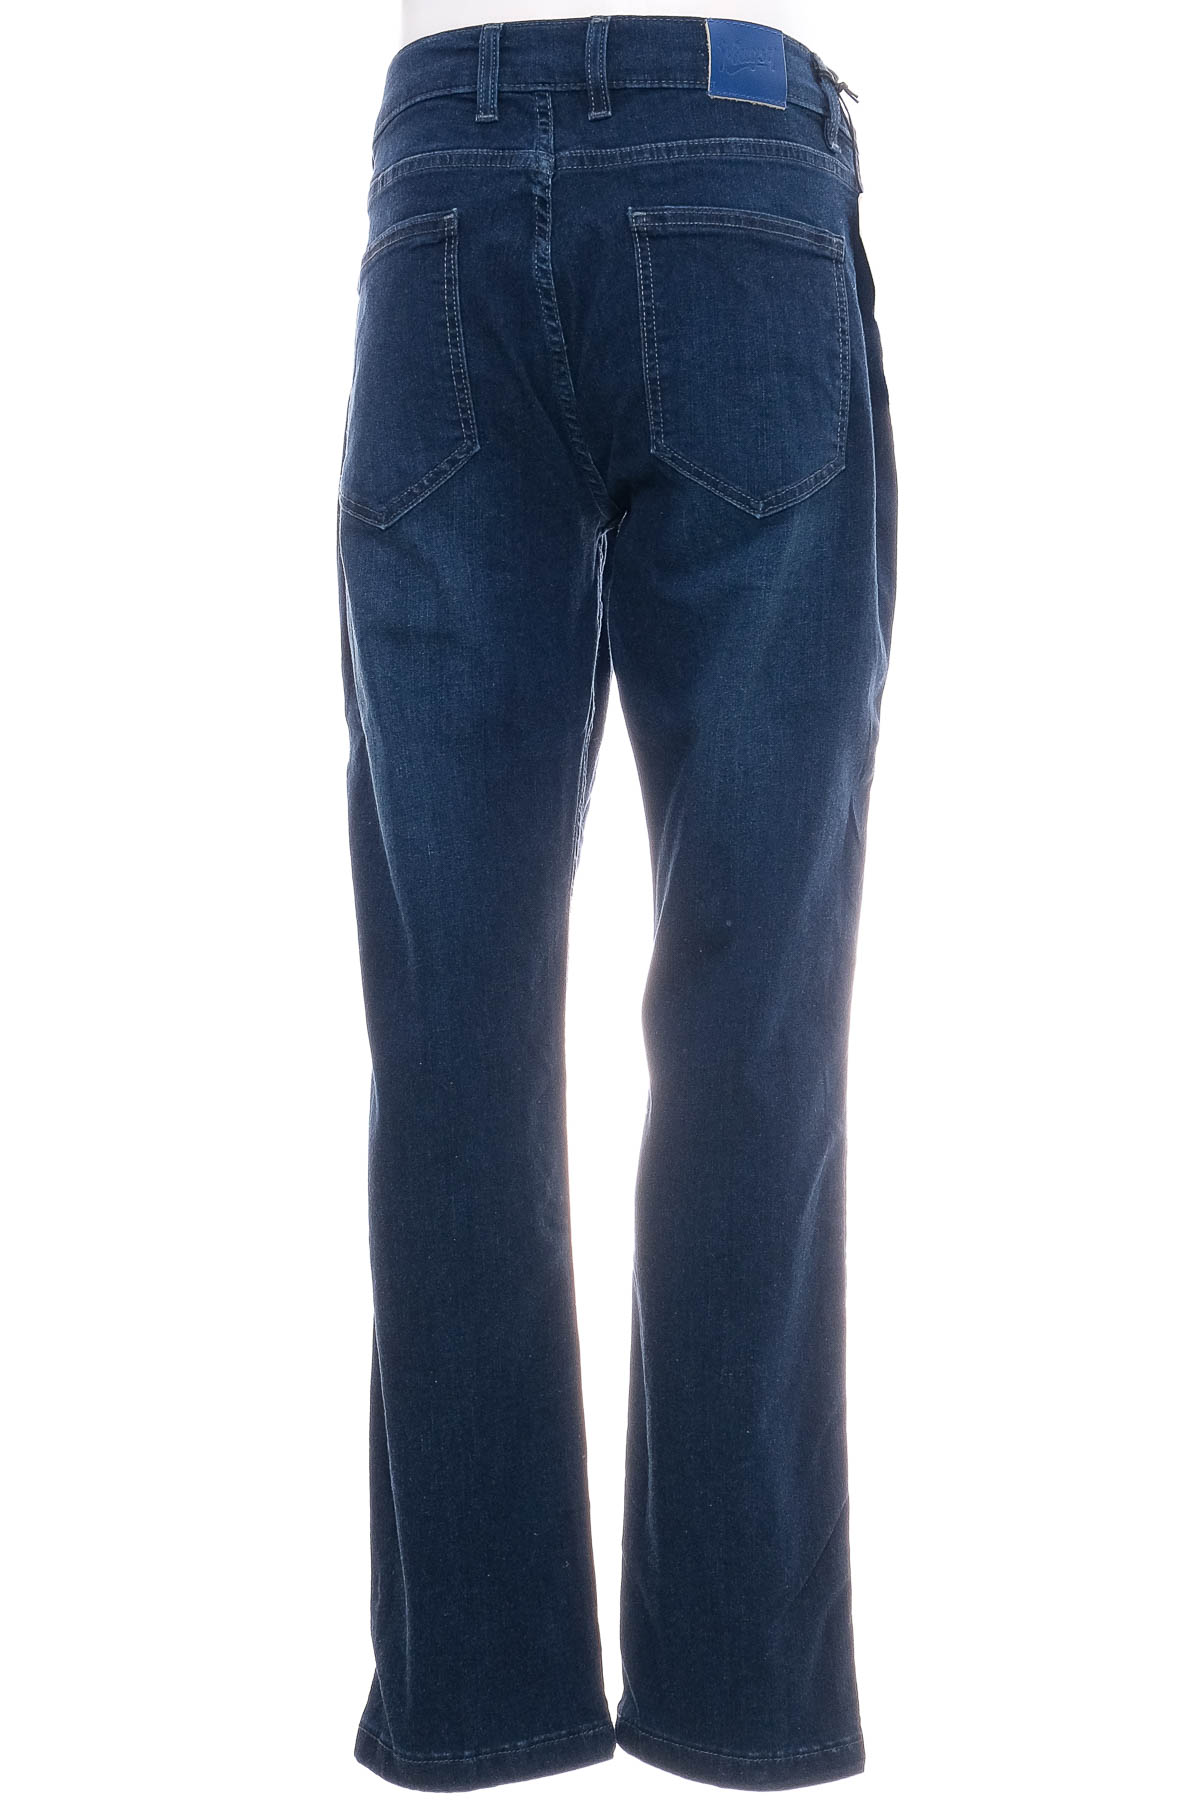 Men's jeans - Mugsy Jeans - 1